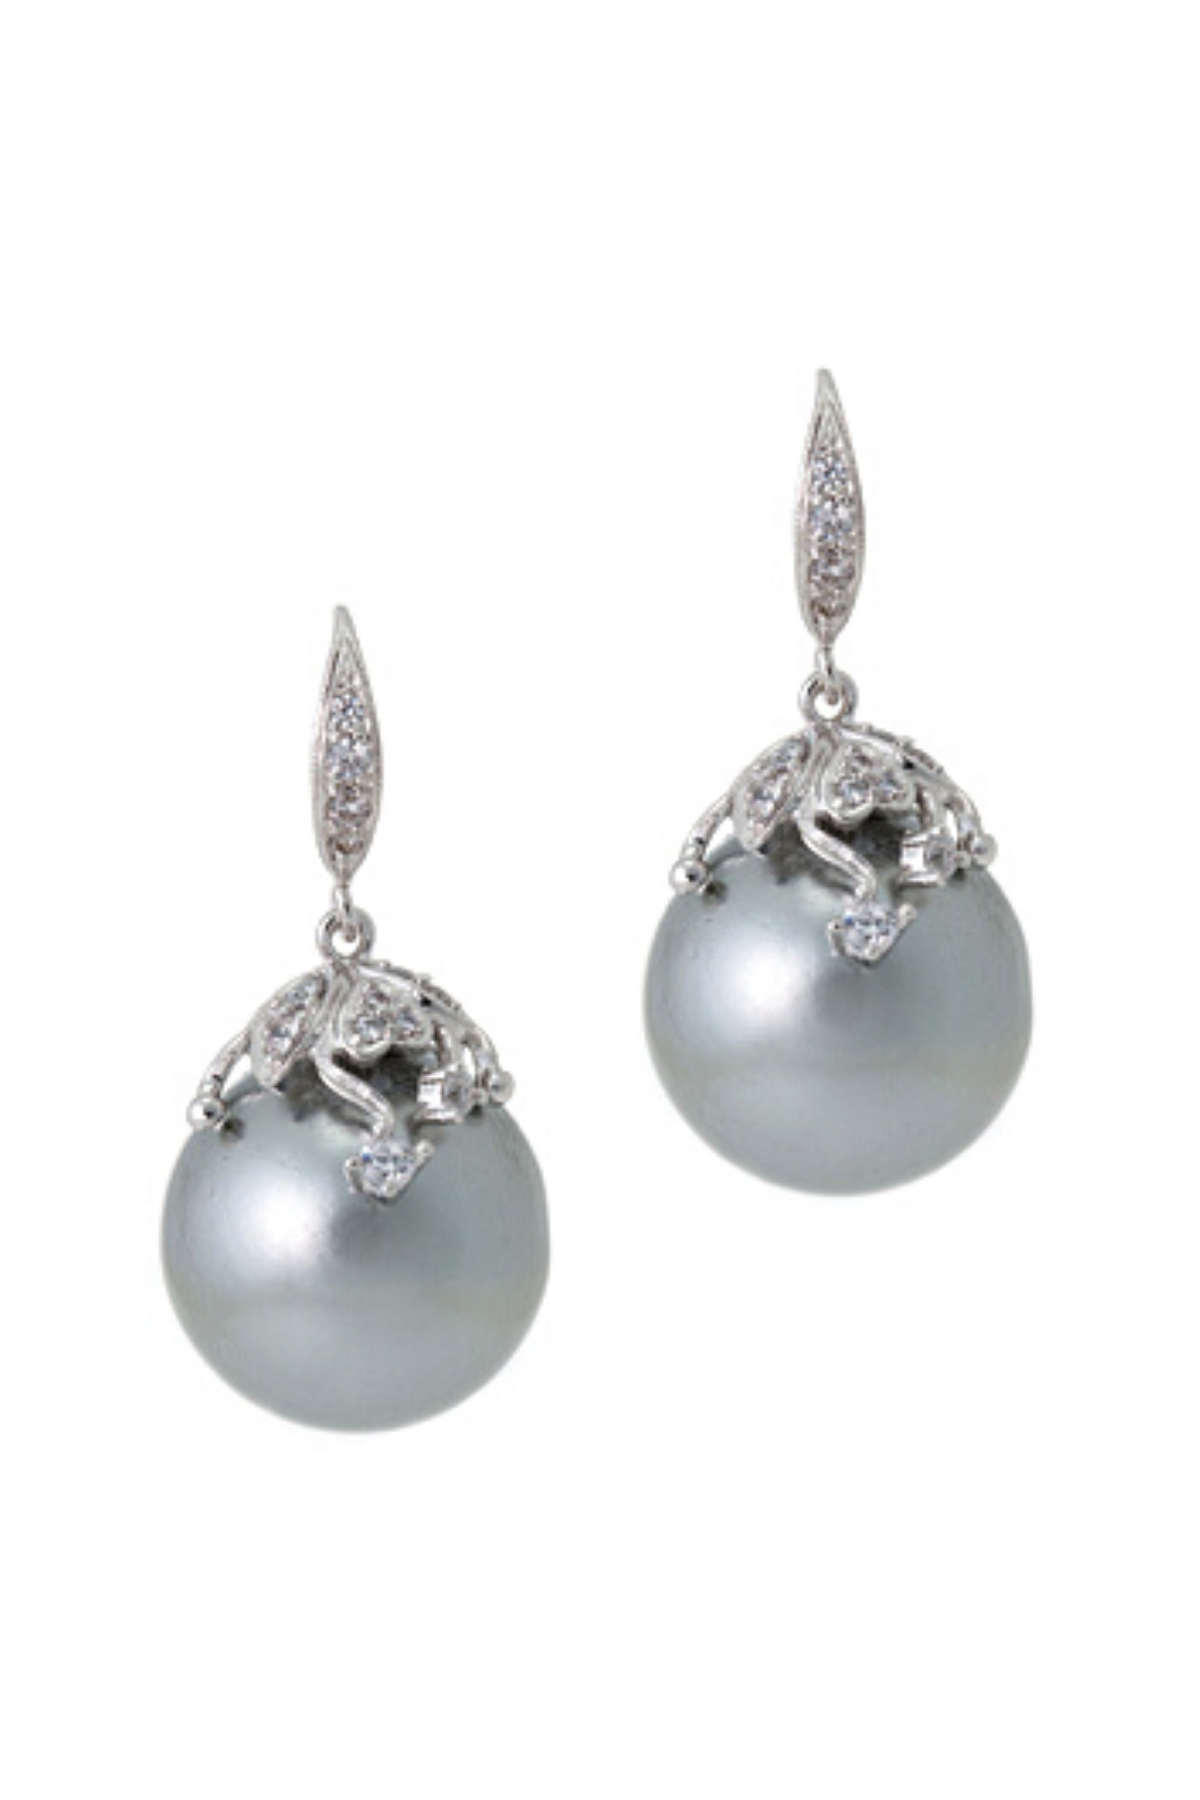 Shell pearl drop earrings - Park Lane Styling & Consulting